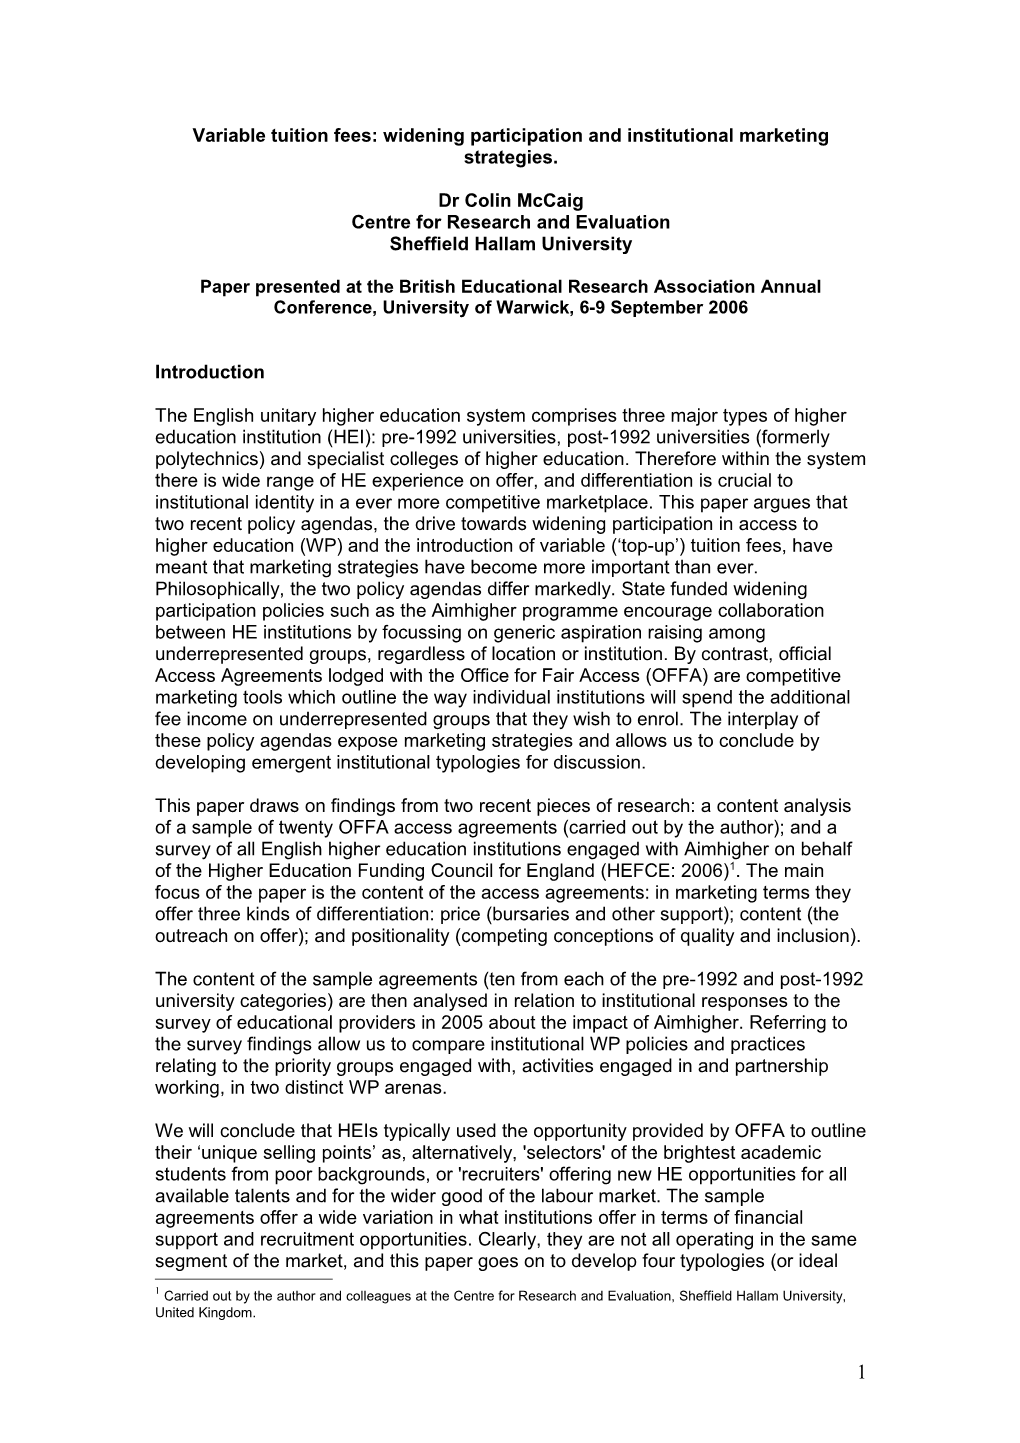 Variable Tuition Fees: Widening Participation and Institutional Marketing Strategies